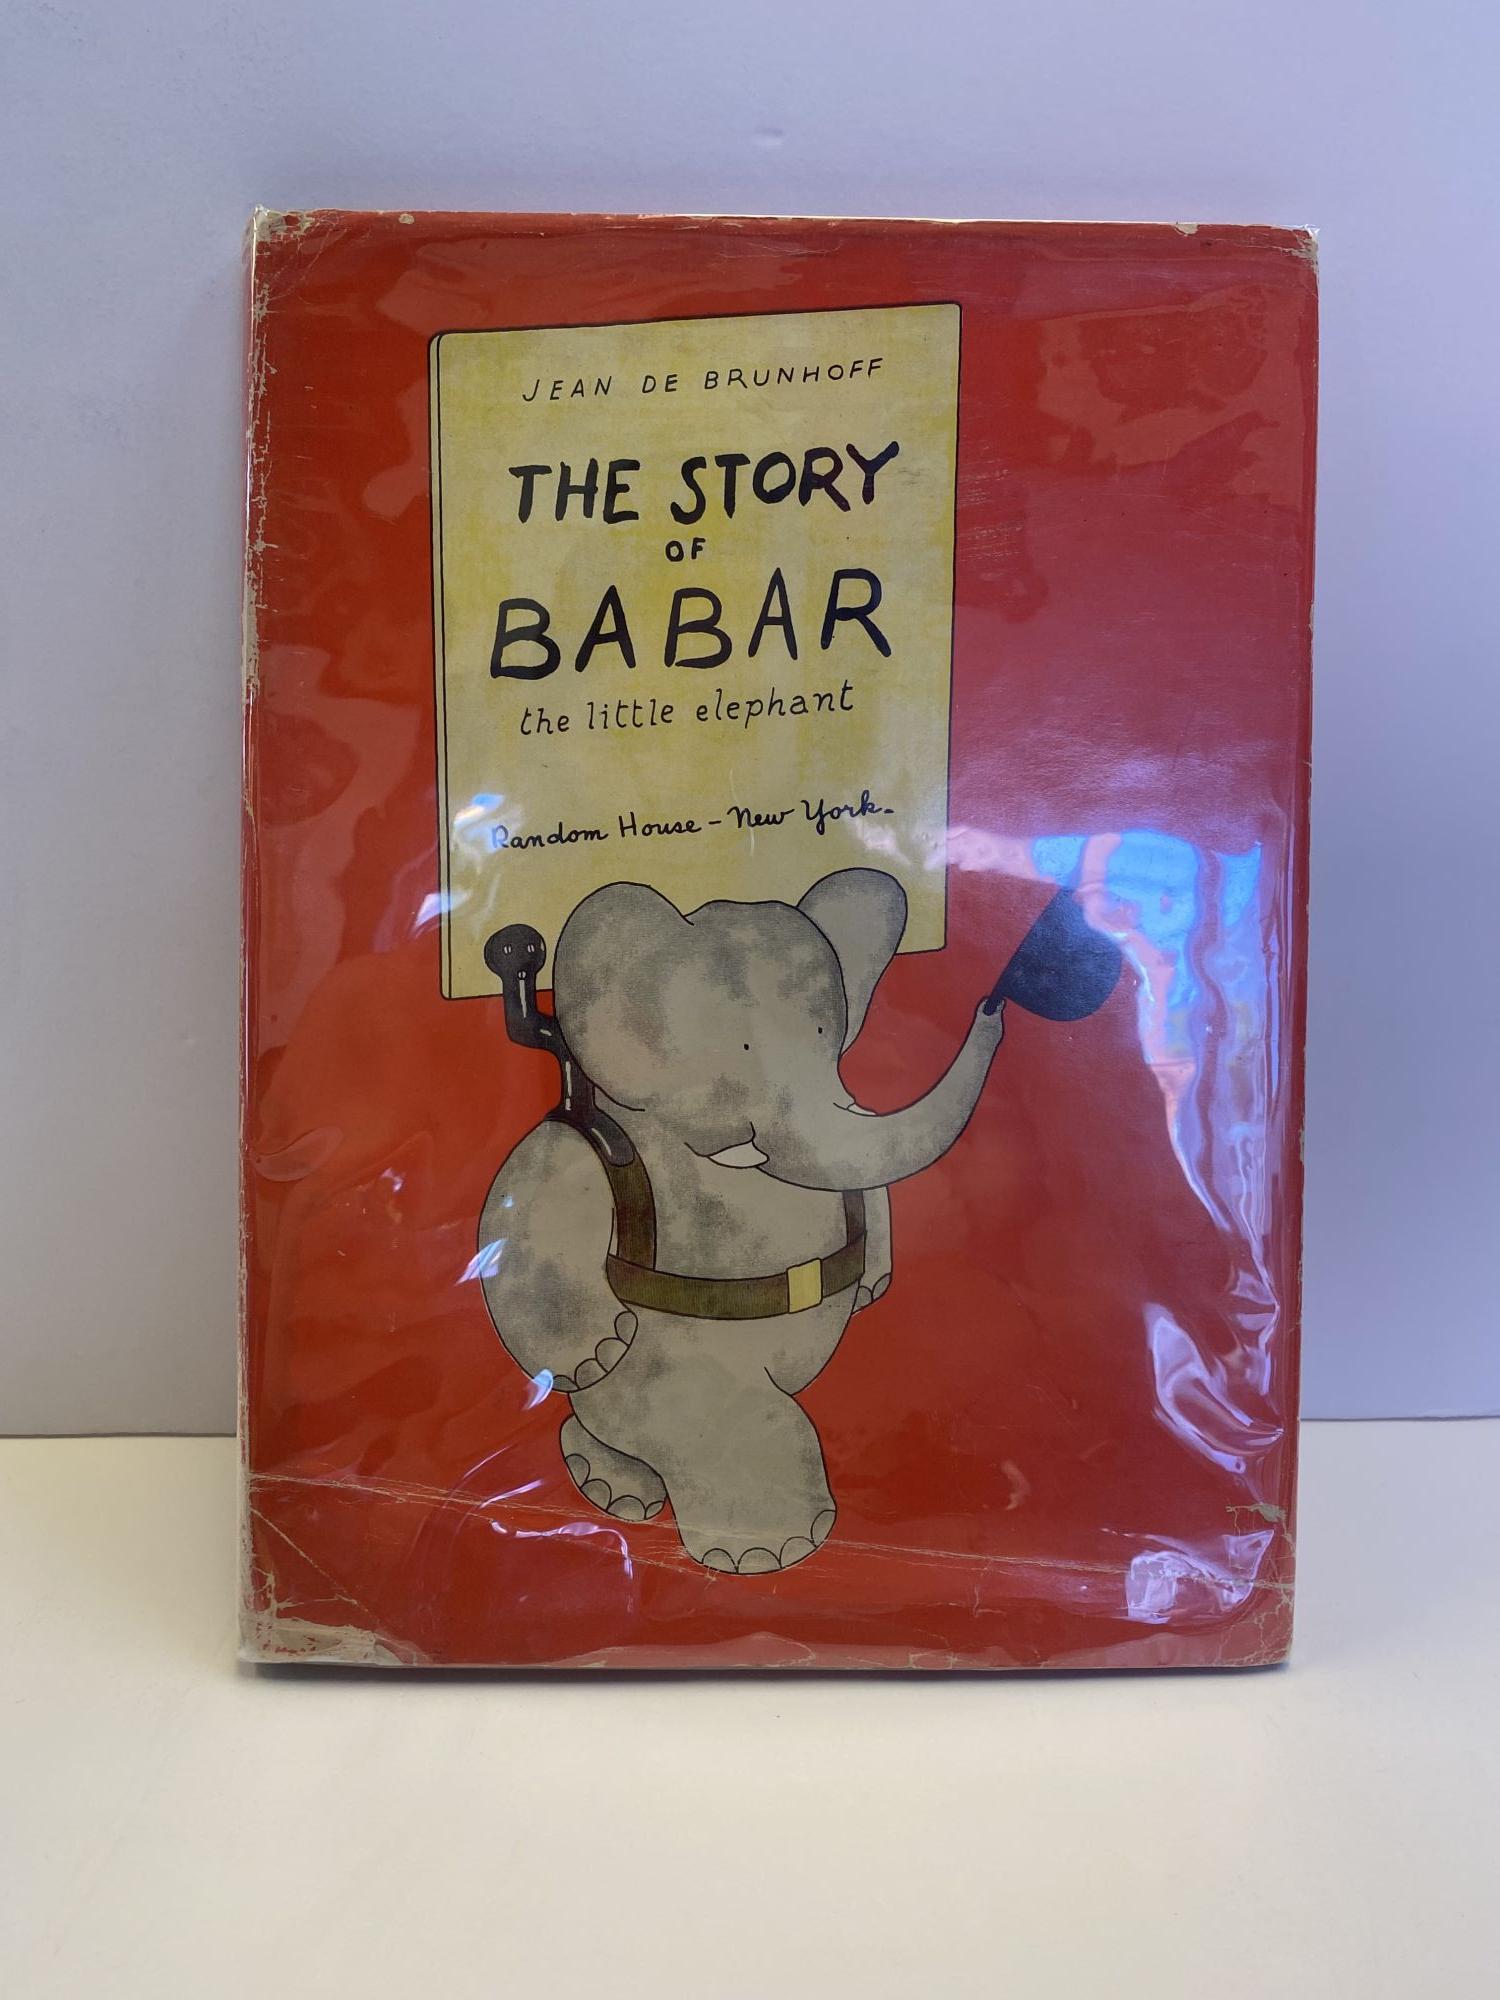 THE　Haas　BABAR,　Edition　Merle　Early　de　American　STORY　LITTLE　ELEPHANT　THE　OF　S.　Jean　Brunhoff,